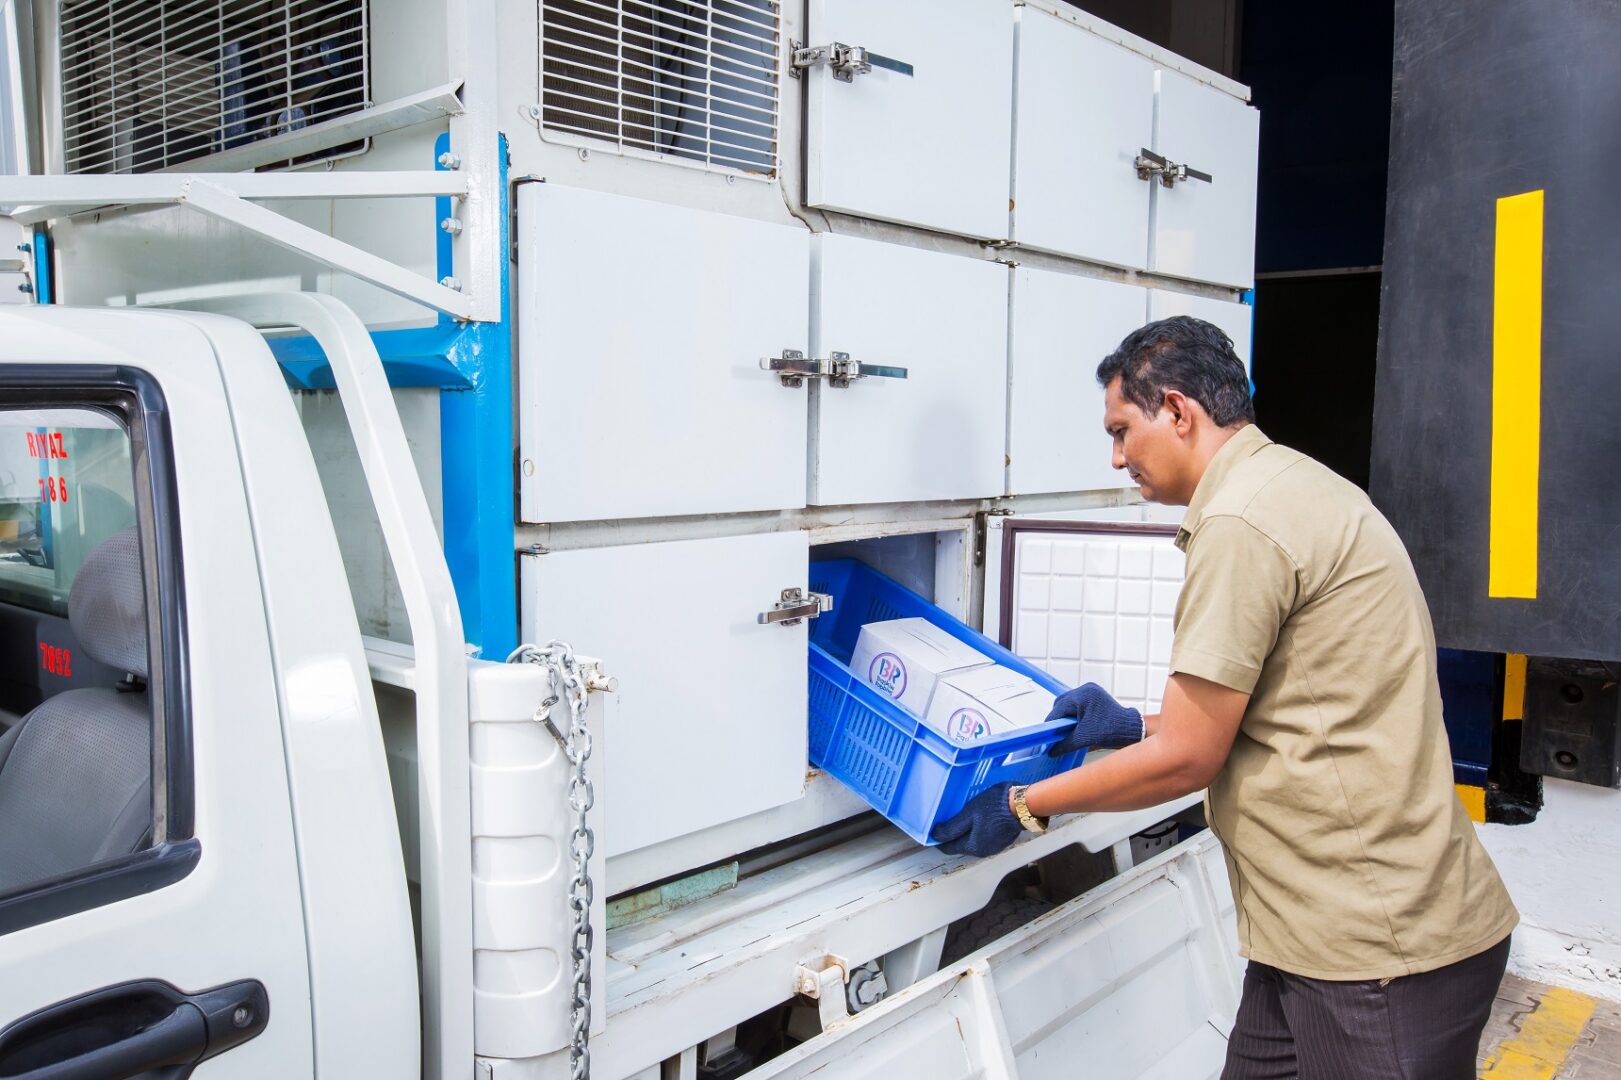 IFC and Snowman Open Call for Cold Chain Innovators Worldwide to Bring Climate-Smart Solutions to India